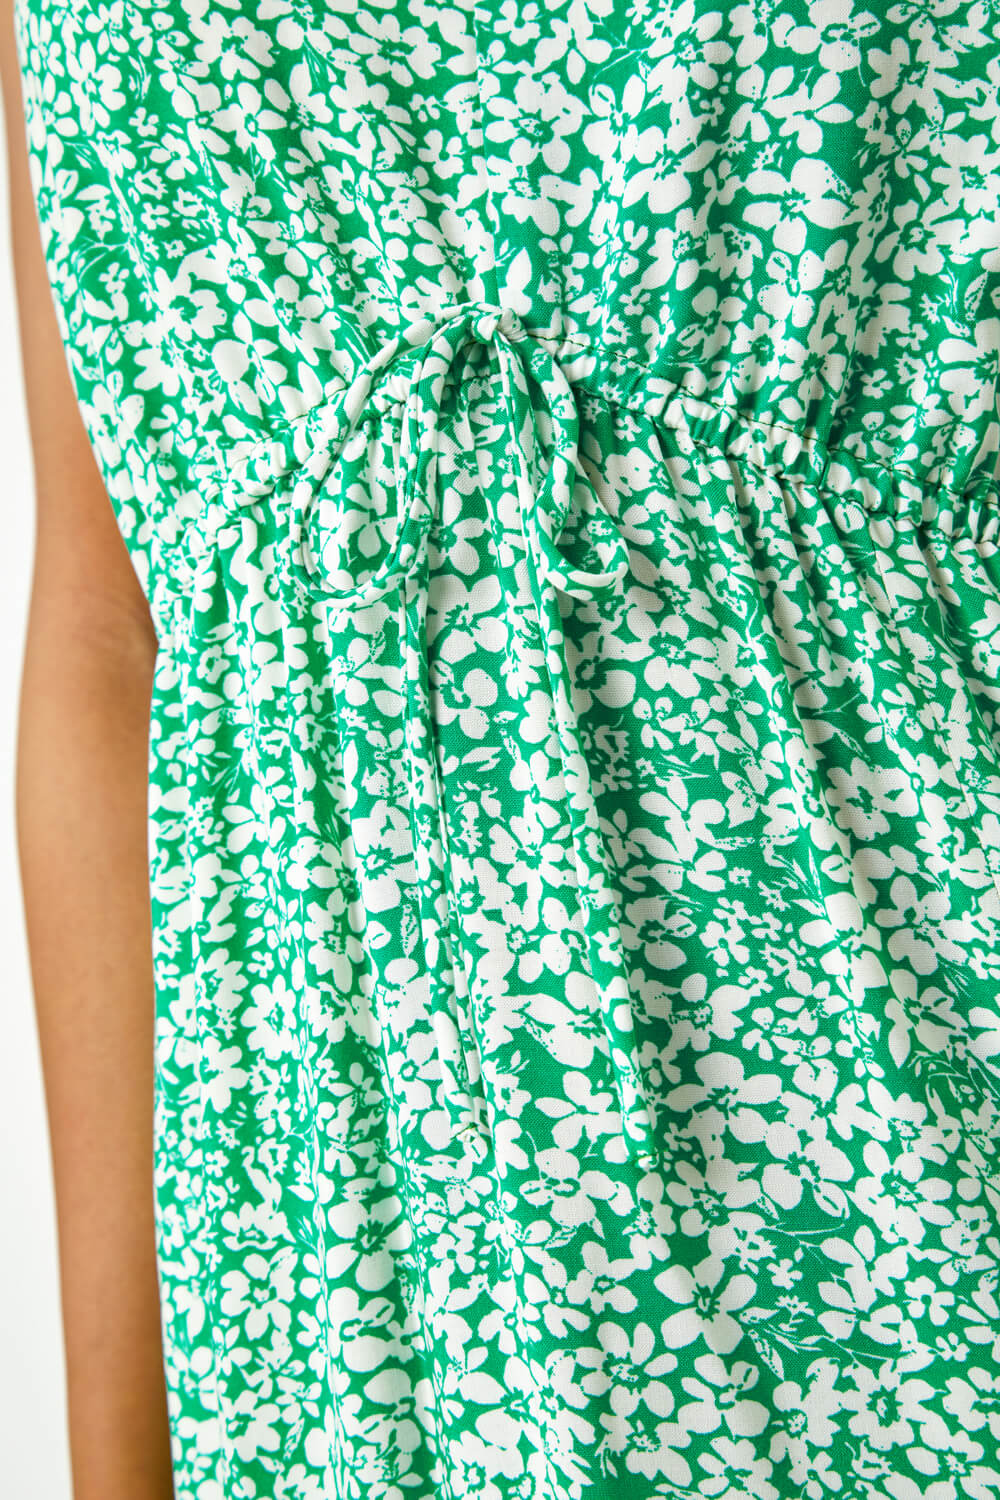 Green Petite Floral Print Stretch Maxi Dress, Image 5 of 5